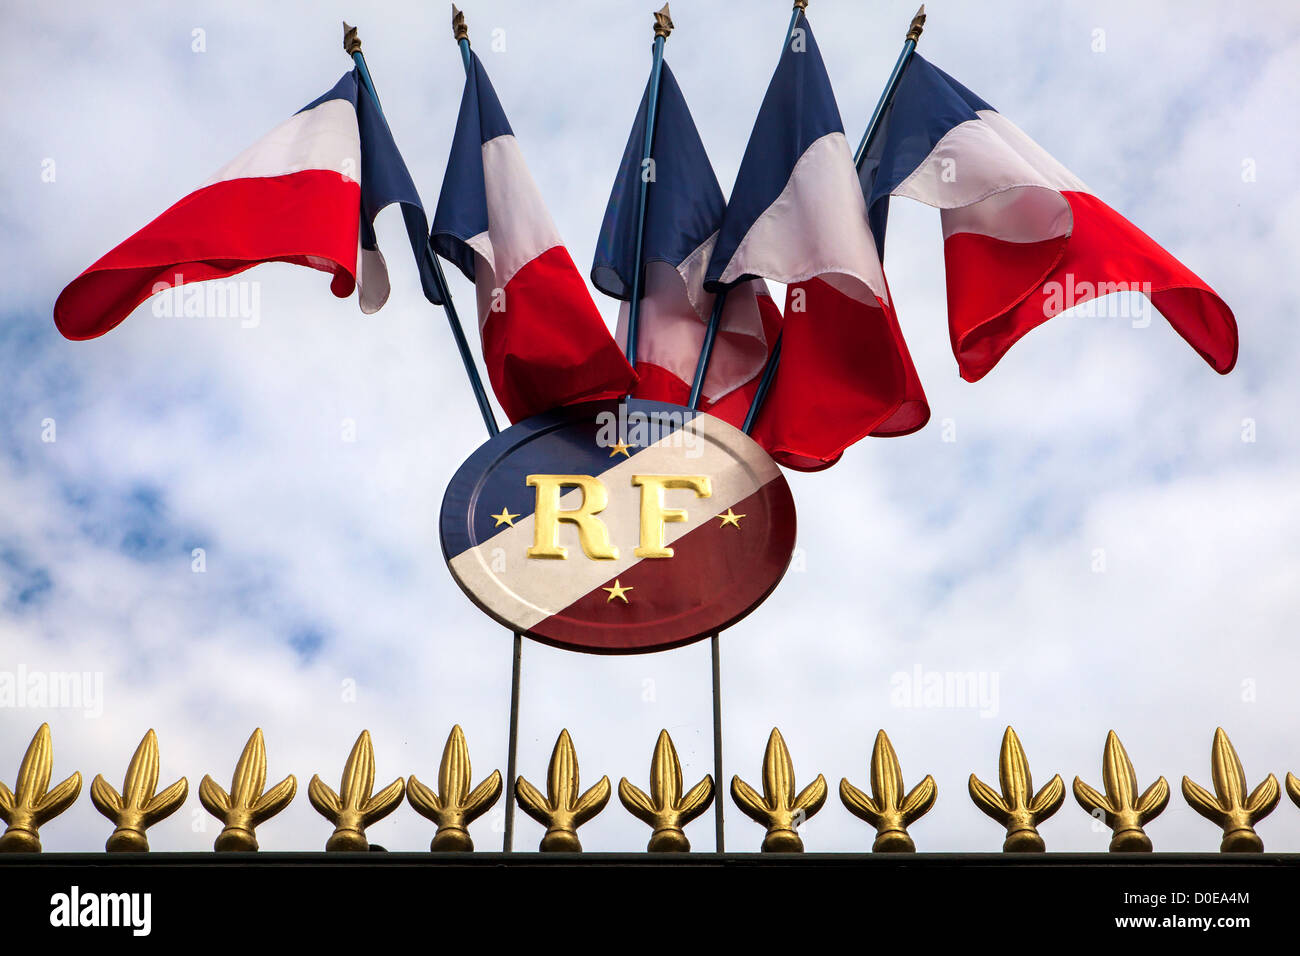 France flag with text Pray for Paris Stock Photo - Alamy